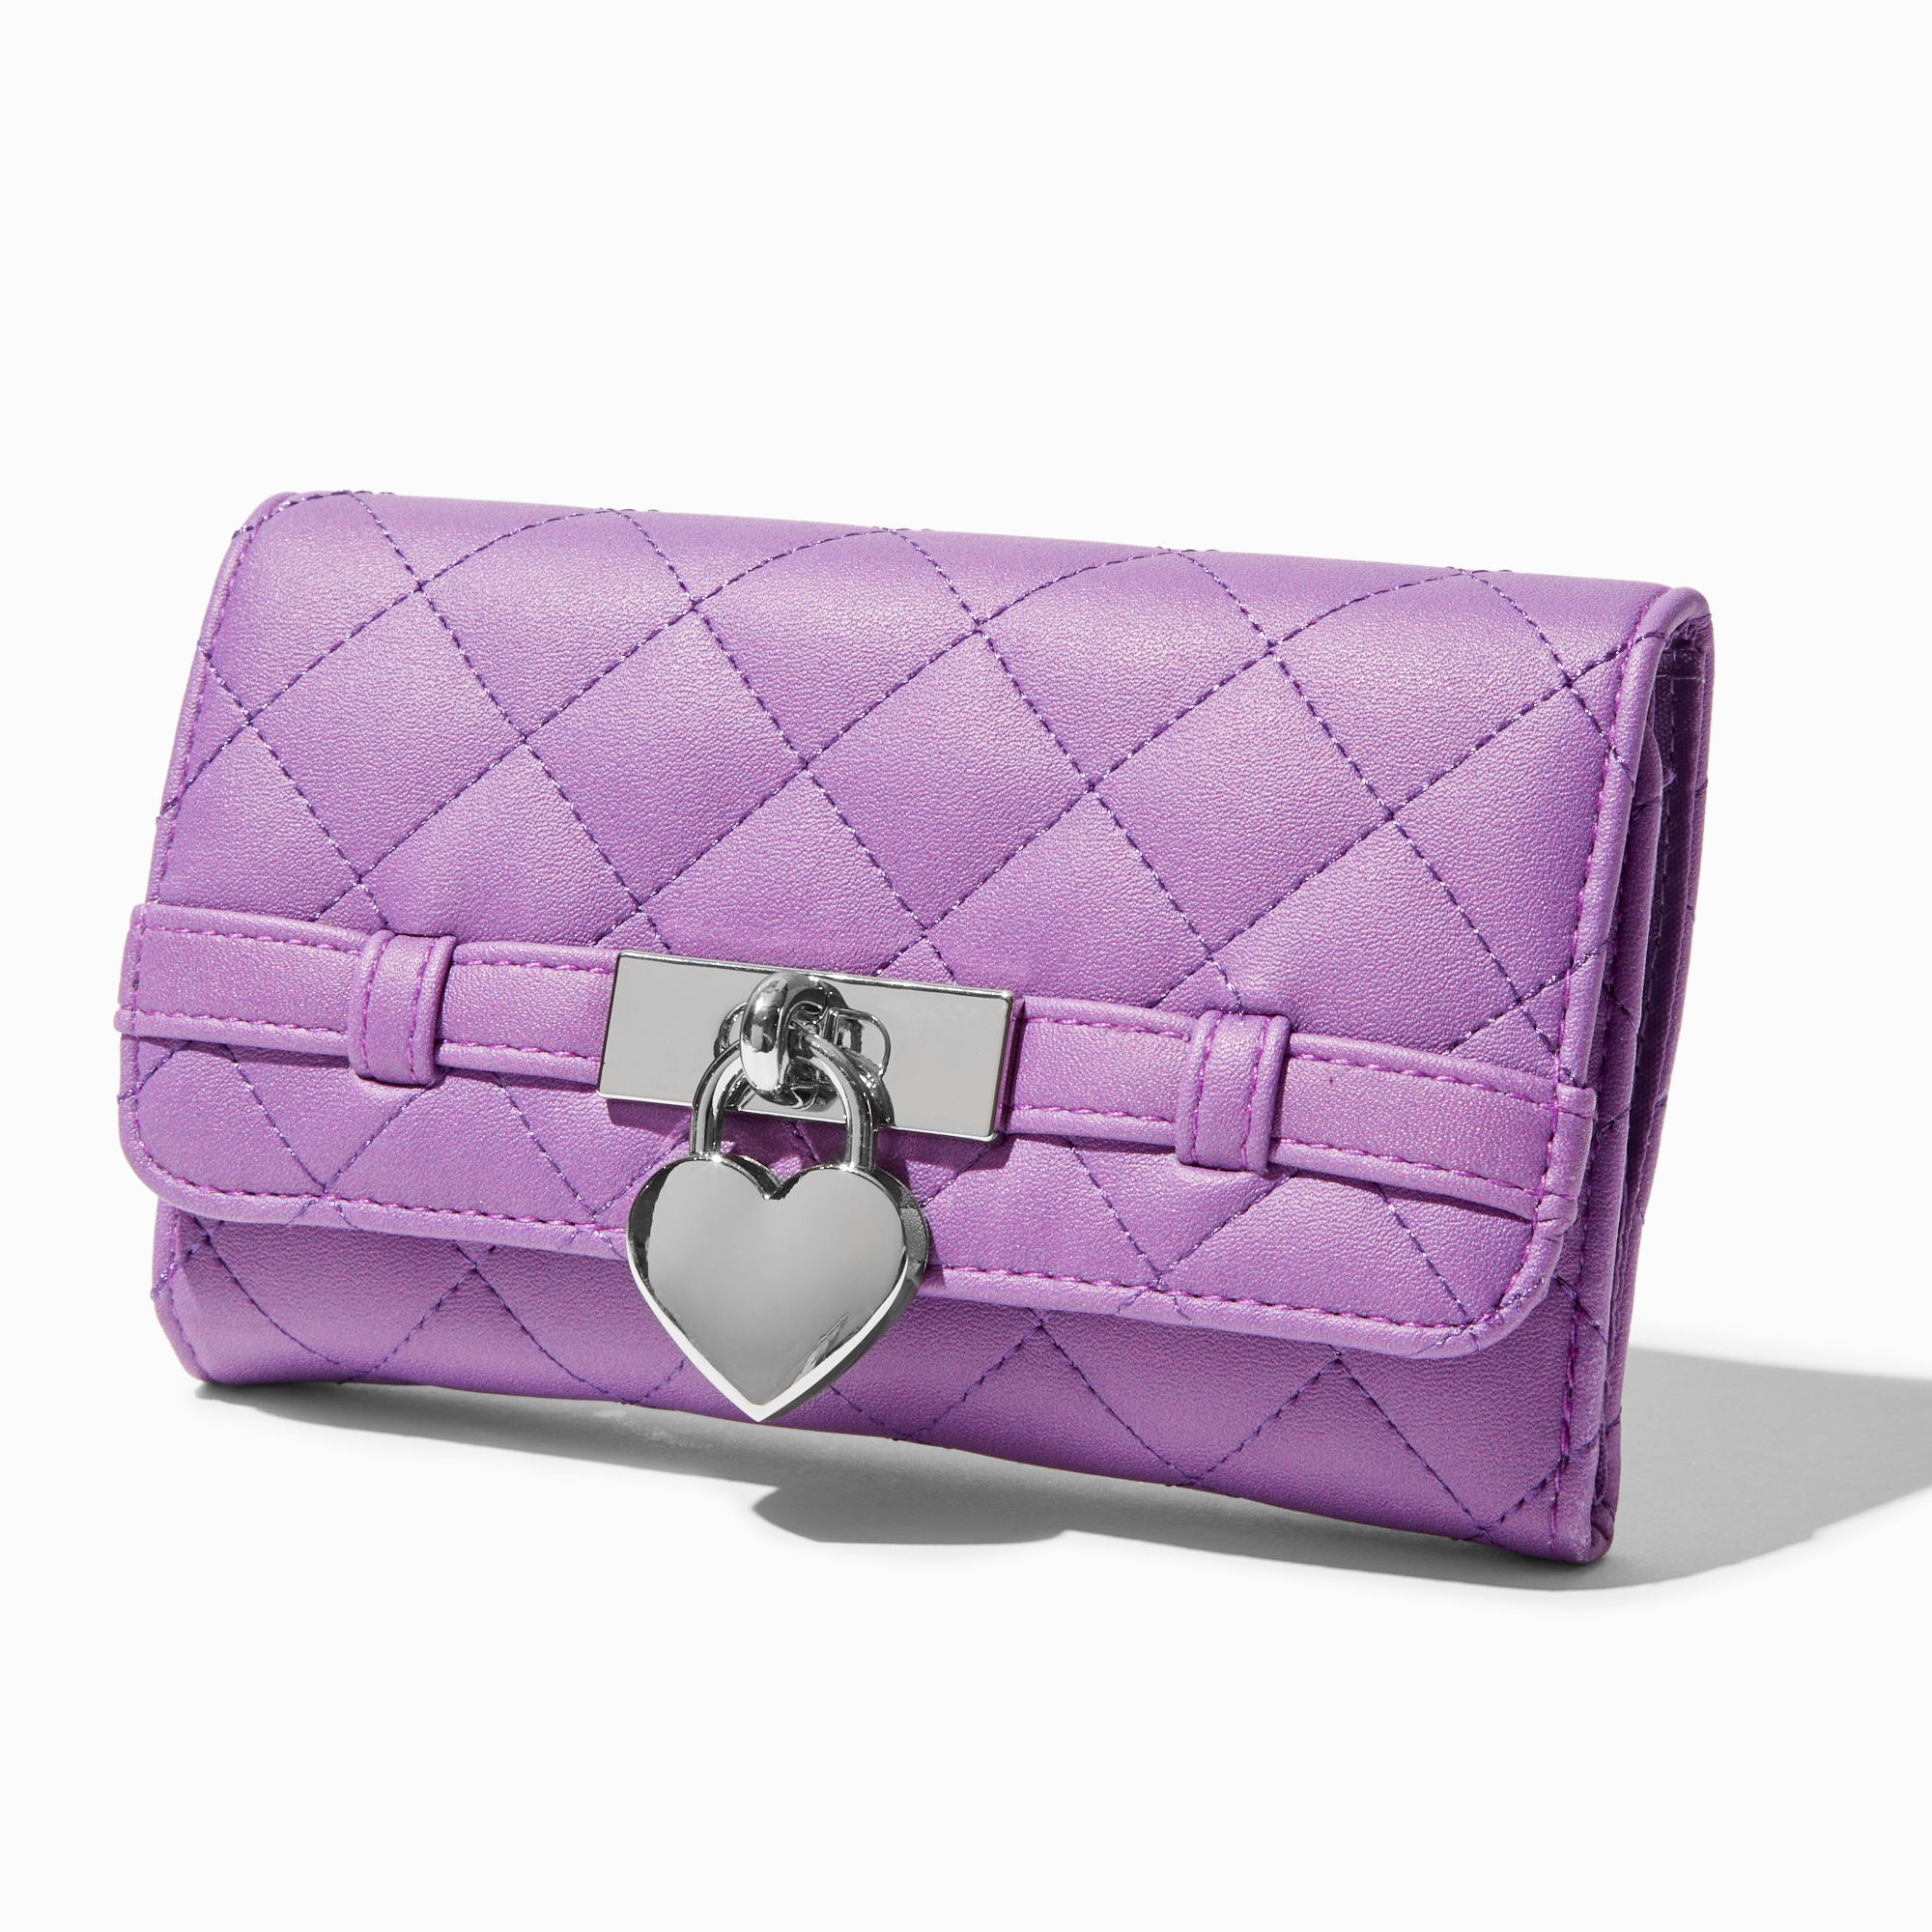 Pin on Purses and Wallets